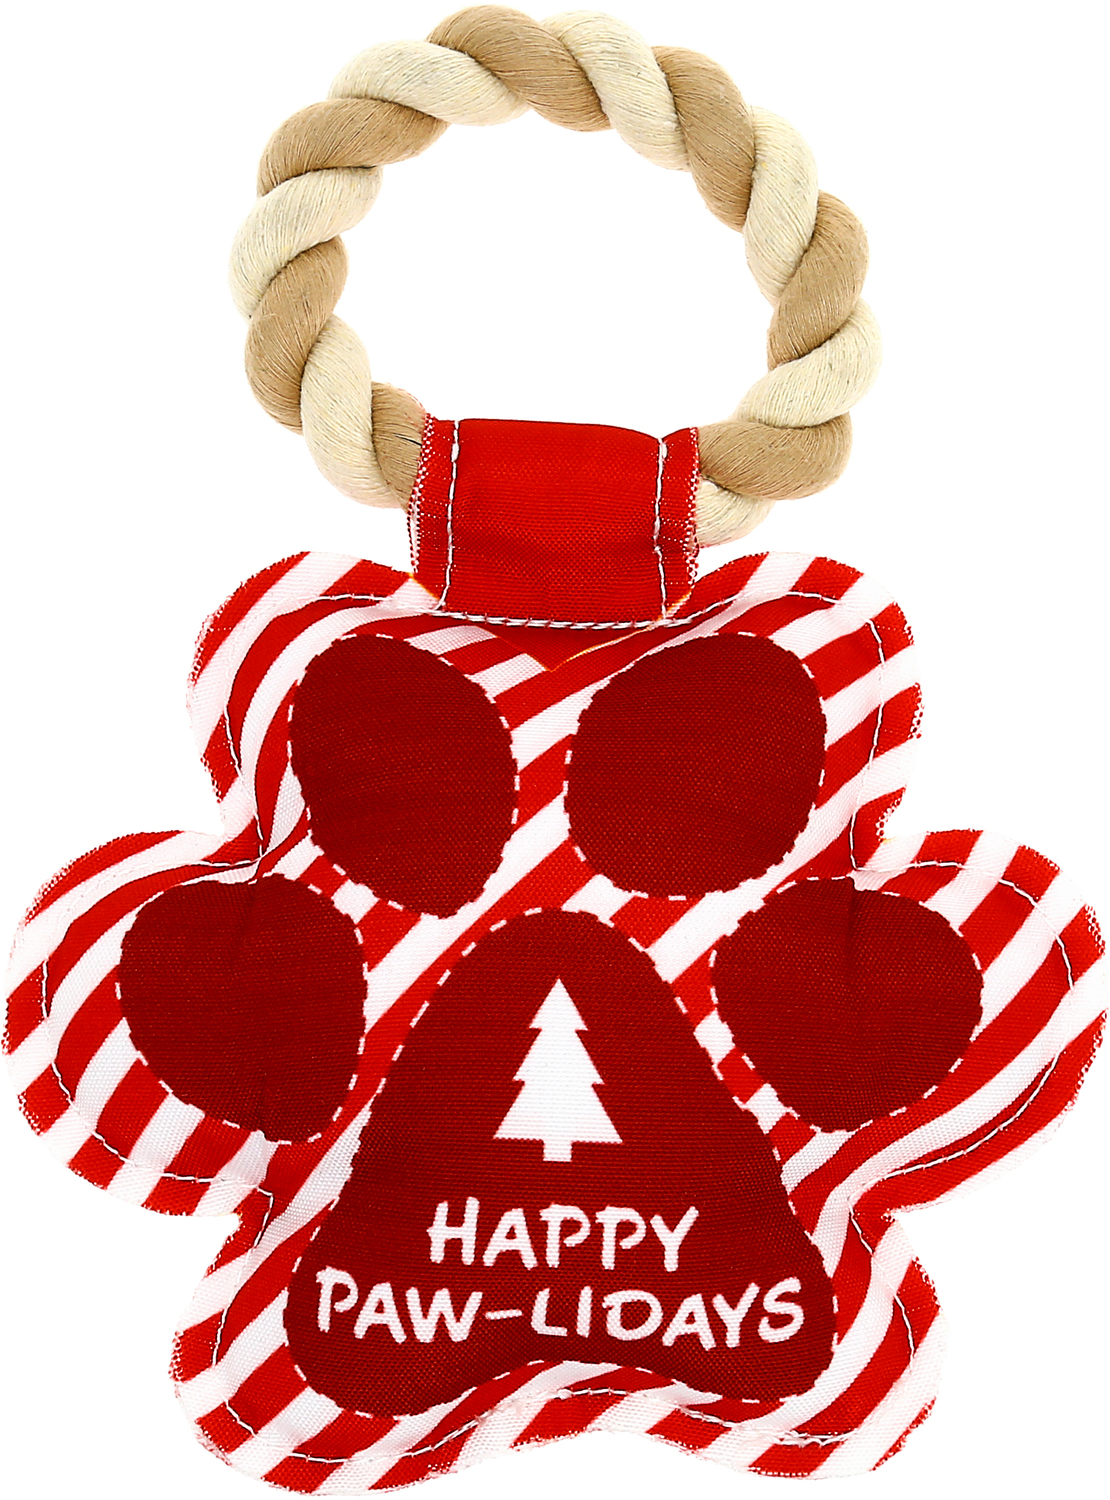 Happy Paw-lidays by Pavilion's Pets - Happy Paw-lidays - 9" Canvas Dog Toy on Rope